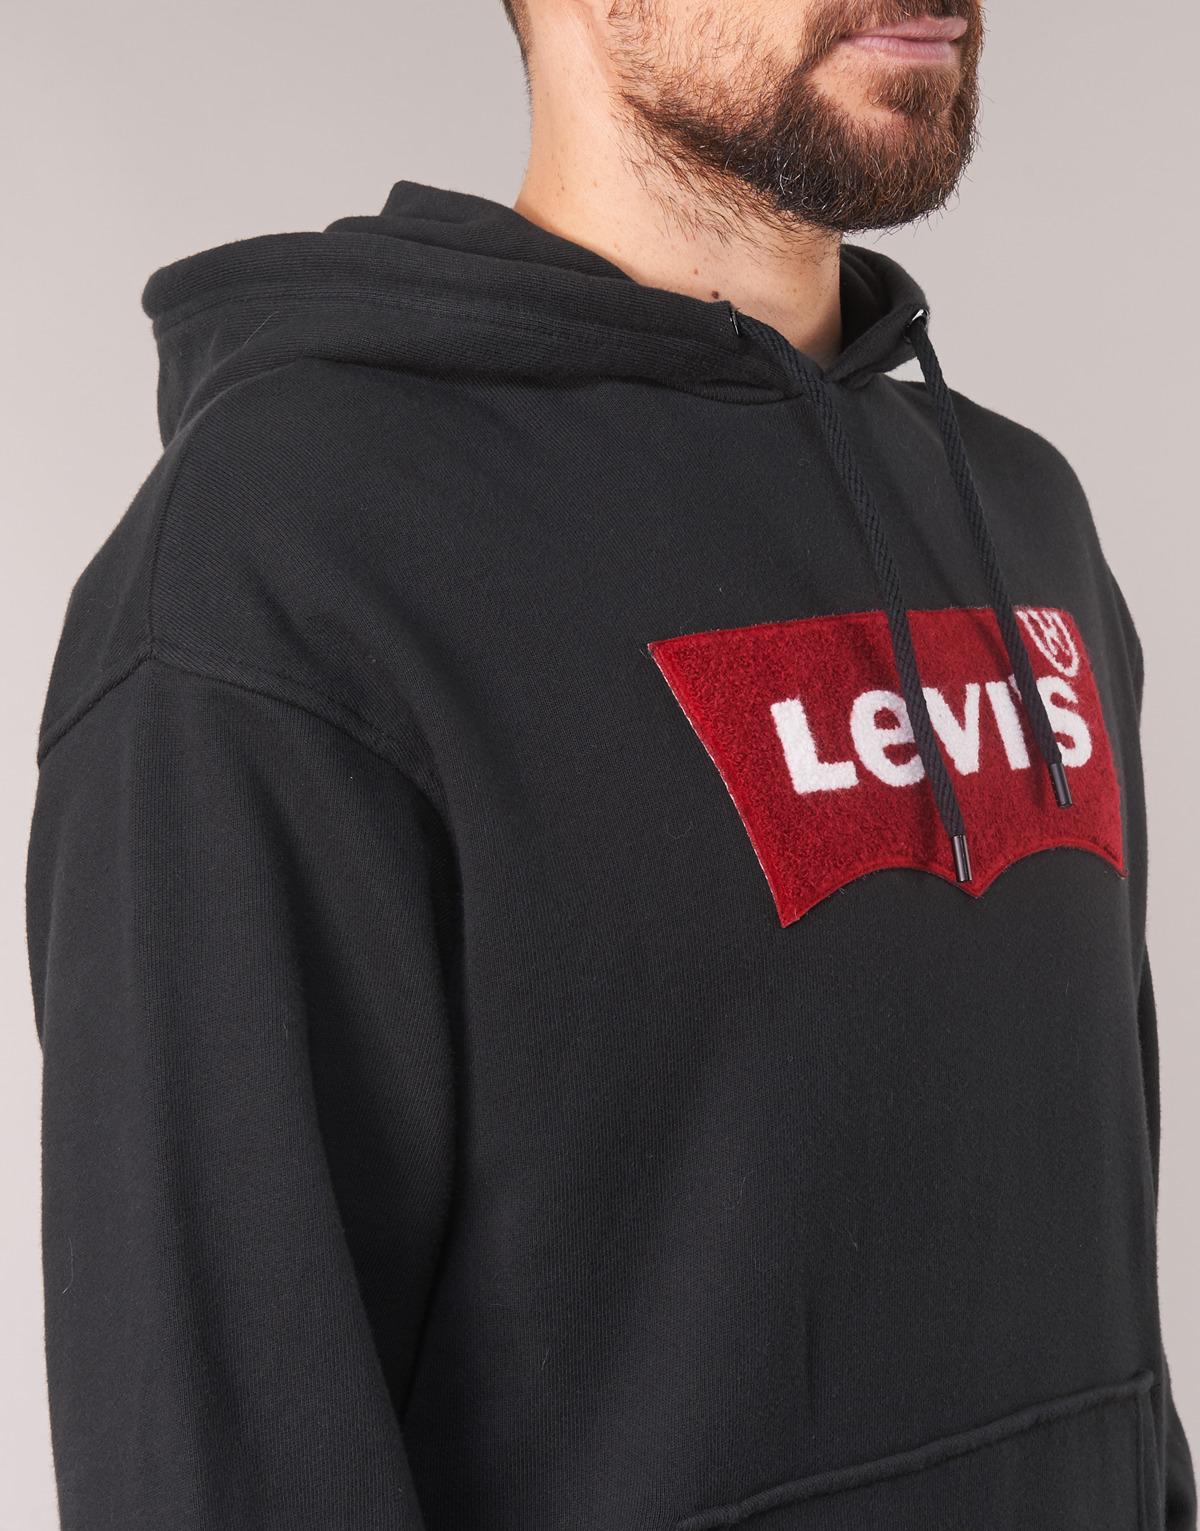 Levis Oversized Pull Hoodie La France, SAVE 48% - aveclumiere.com